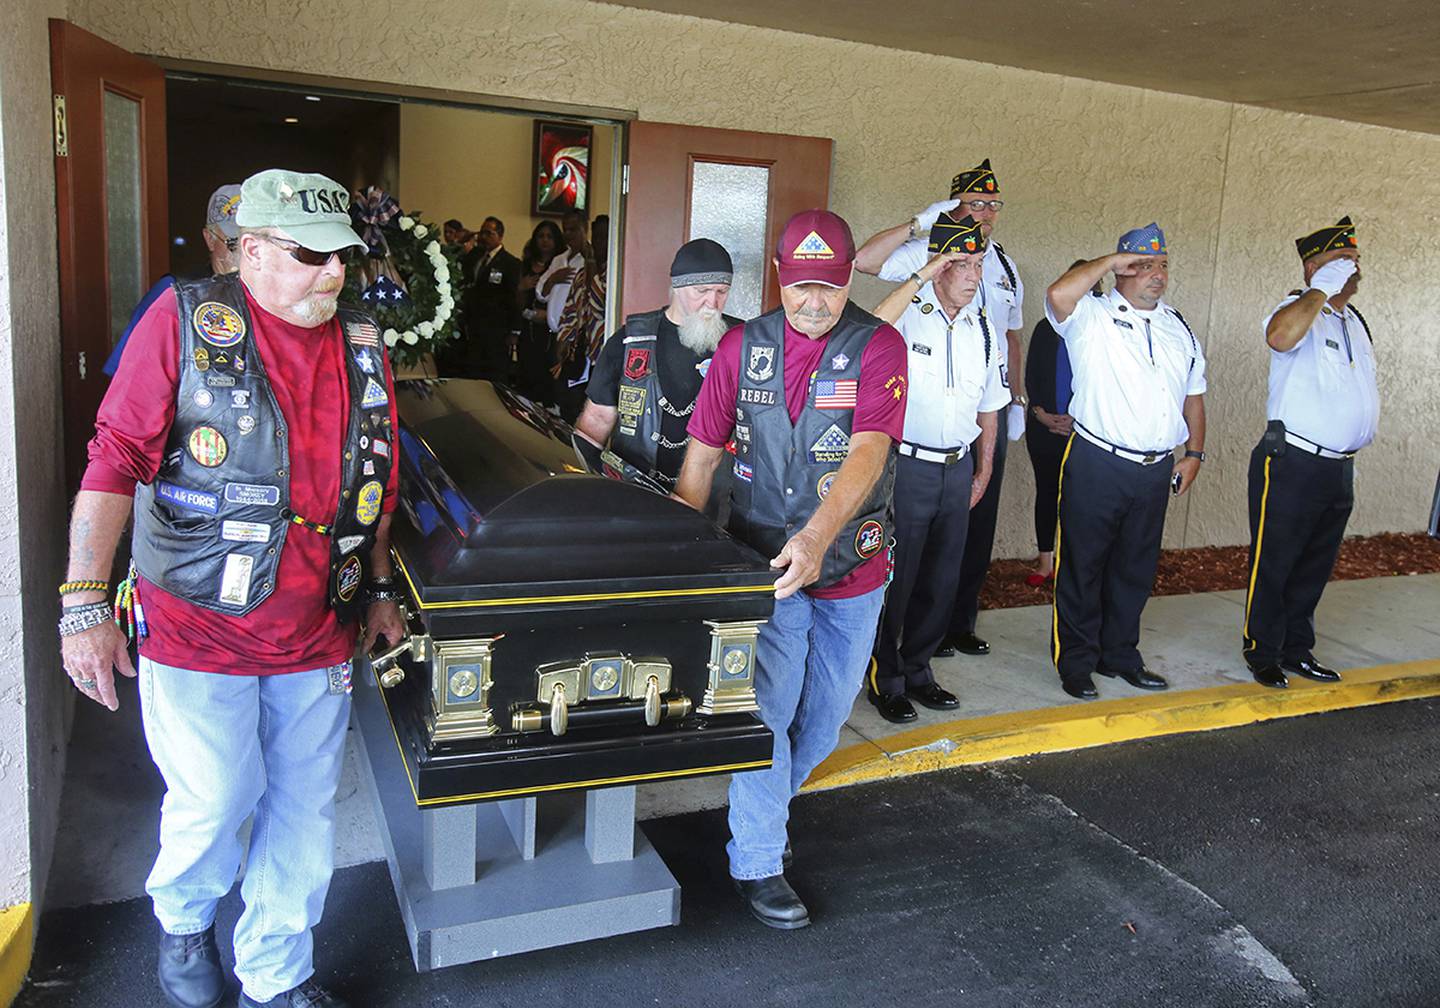 Motorcyclists from VFW Post 4287 and American Legion Post 155 present the casket of Stephen Jerald Spicer, a homeless U.S. Army veteran, during a full military honors service at Woodlawn Memorial Park in Gotha, Fla., July 18, 2019.